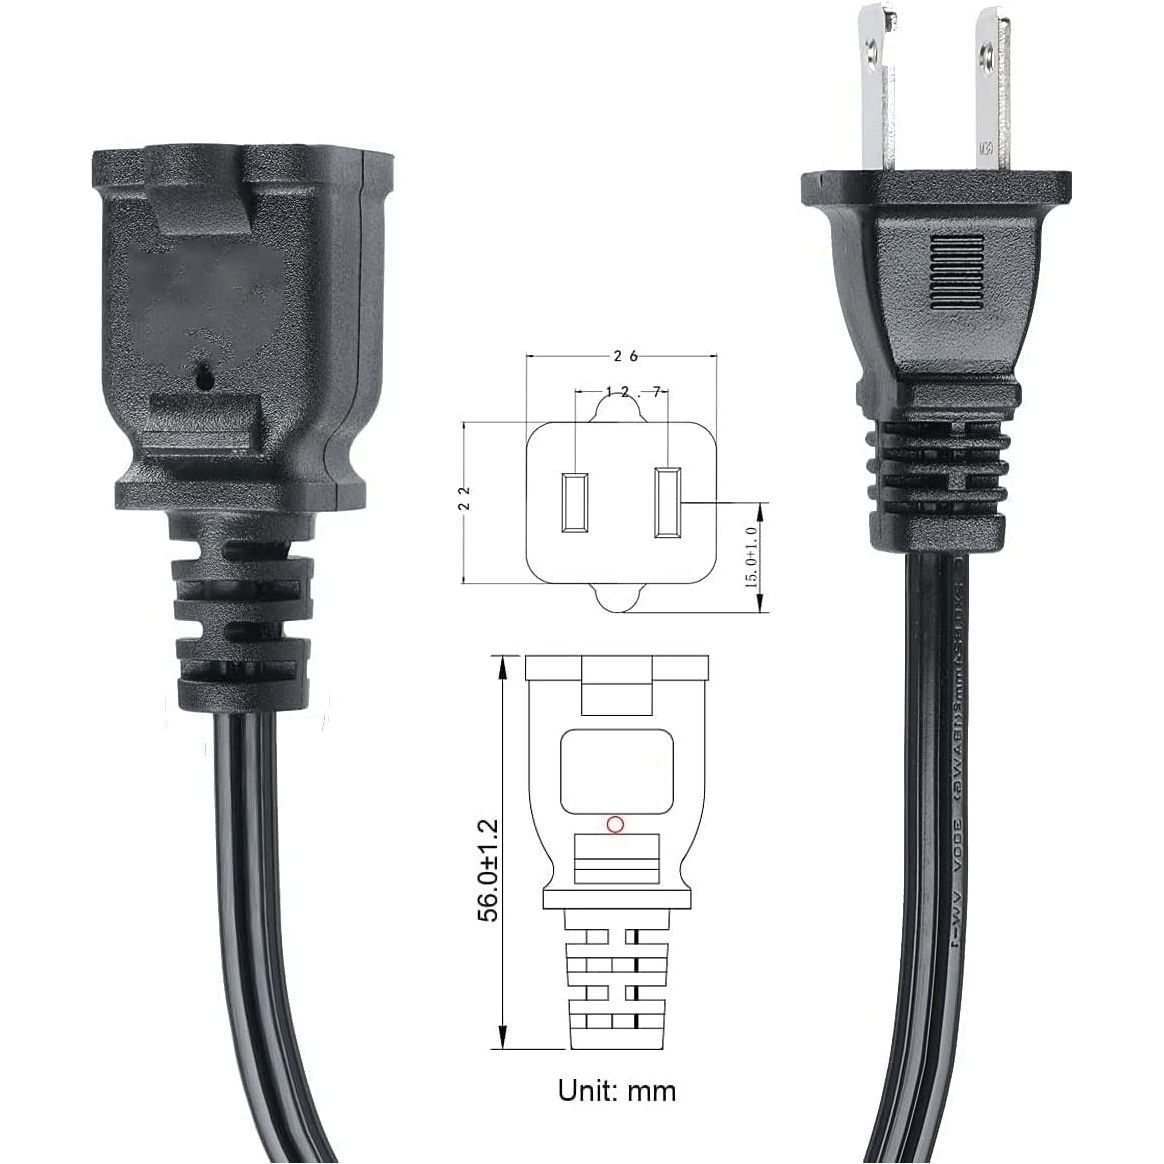 2-Prong Male-Female Extension Power Cord Cable; Outlet Extension Cable Cord US AC 2-Prong Male-Female Power Cable 13A/125V; Black 5 Core EXC BLK 10FT Moorescarts